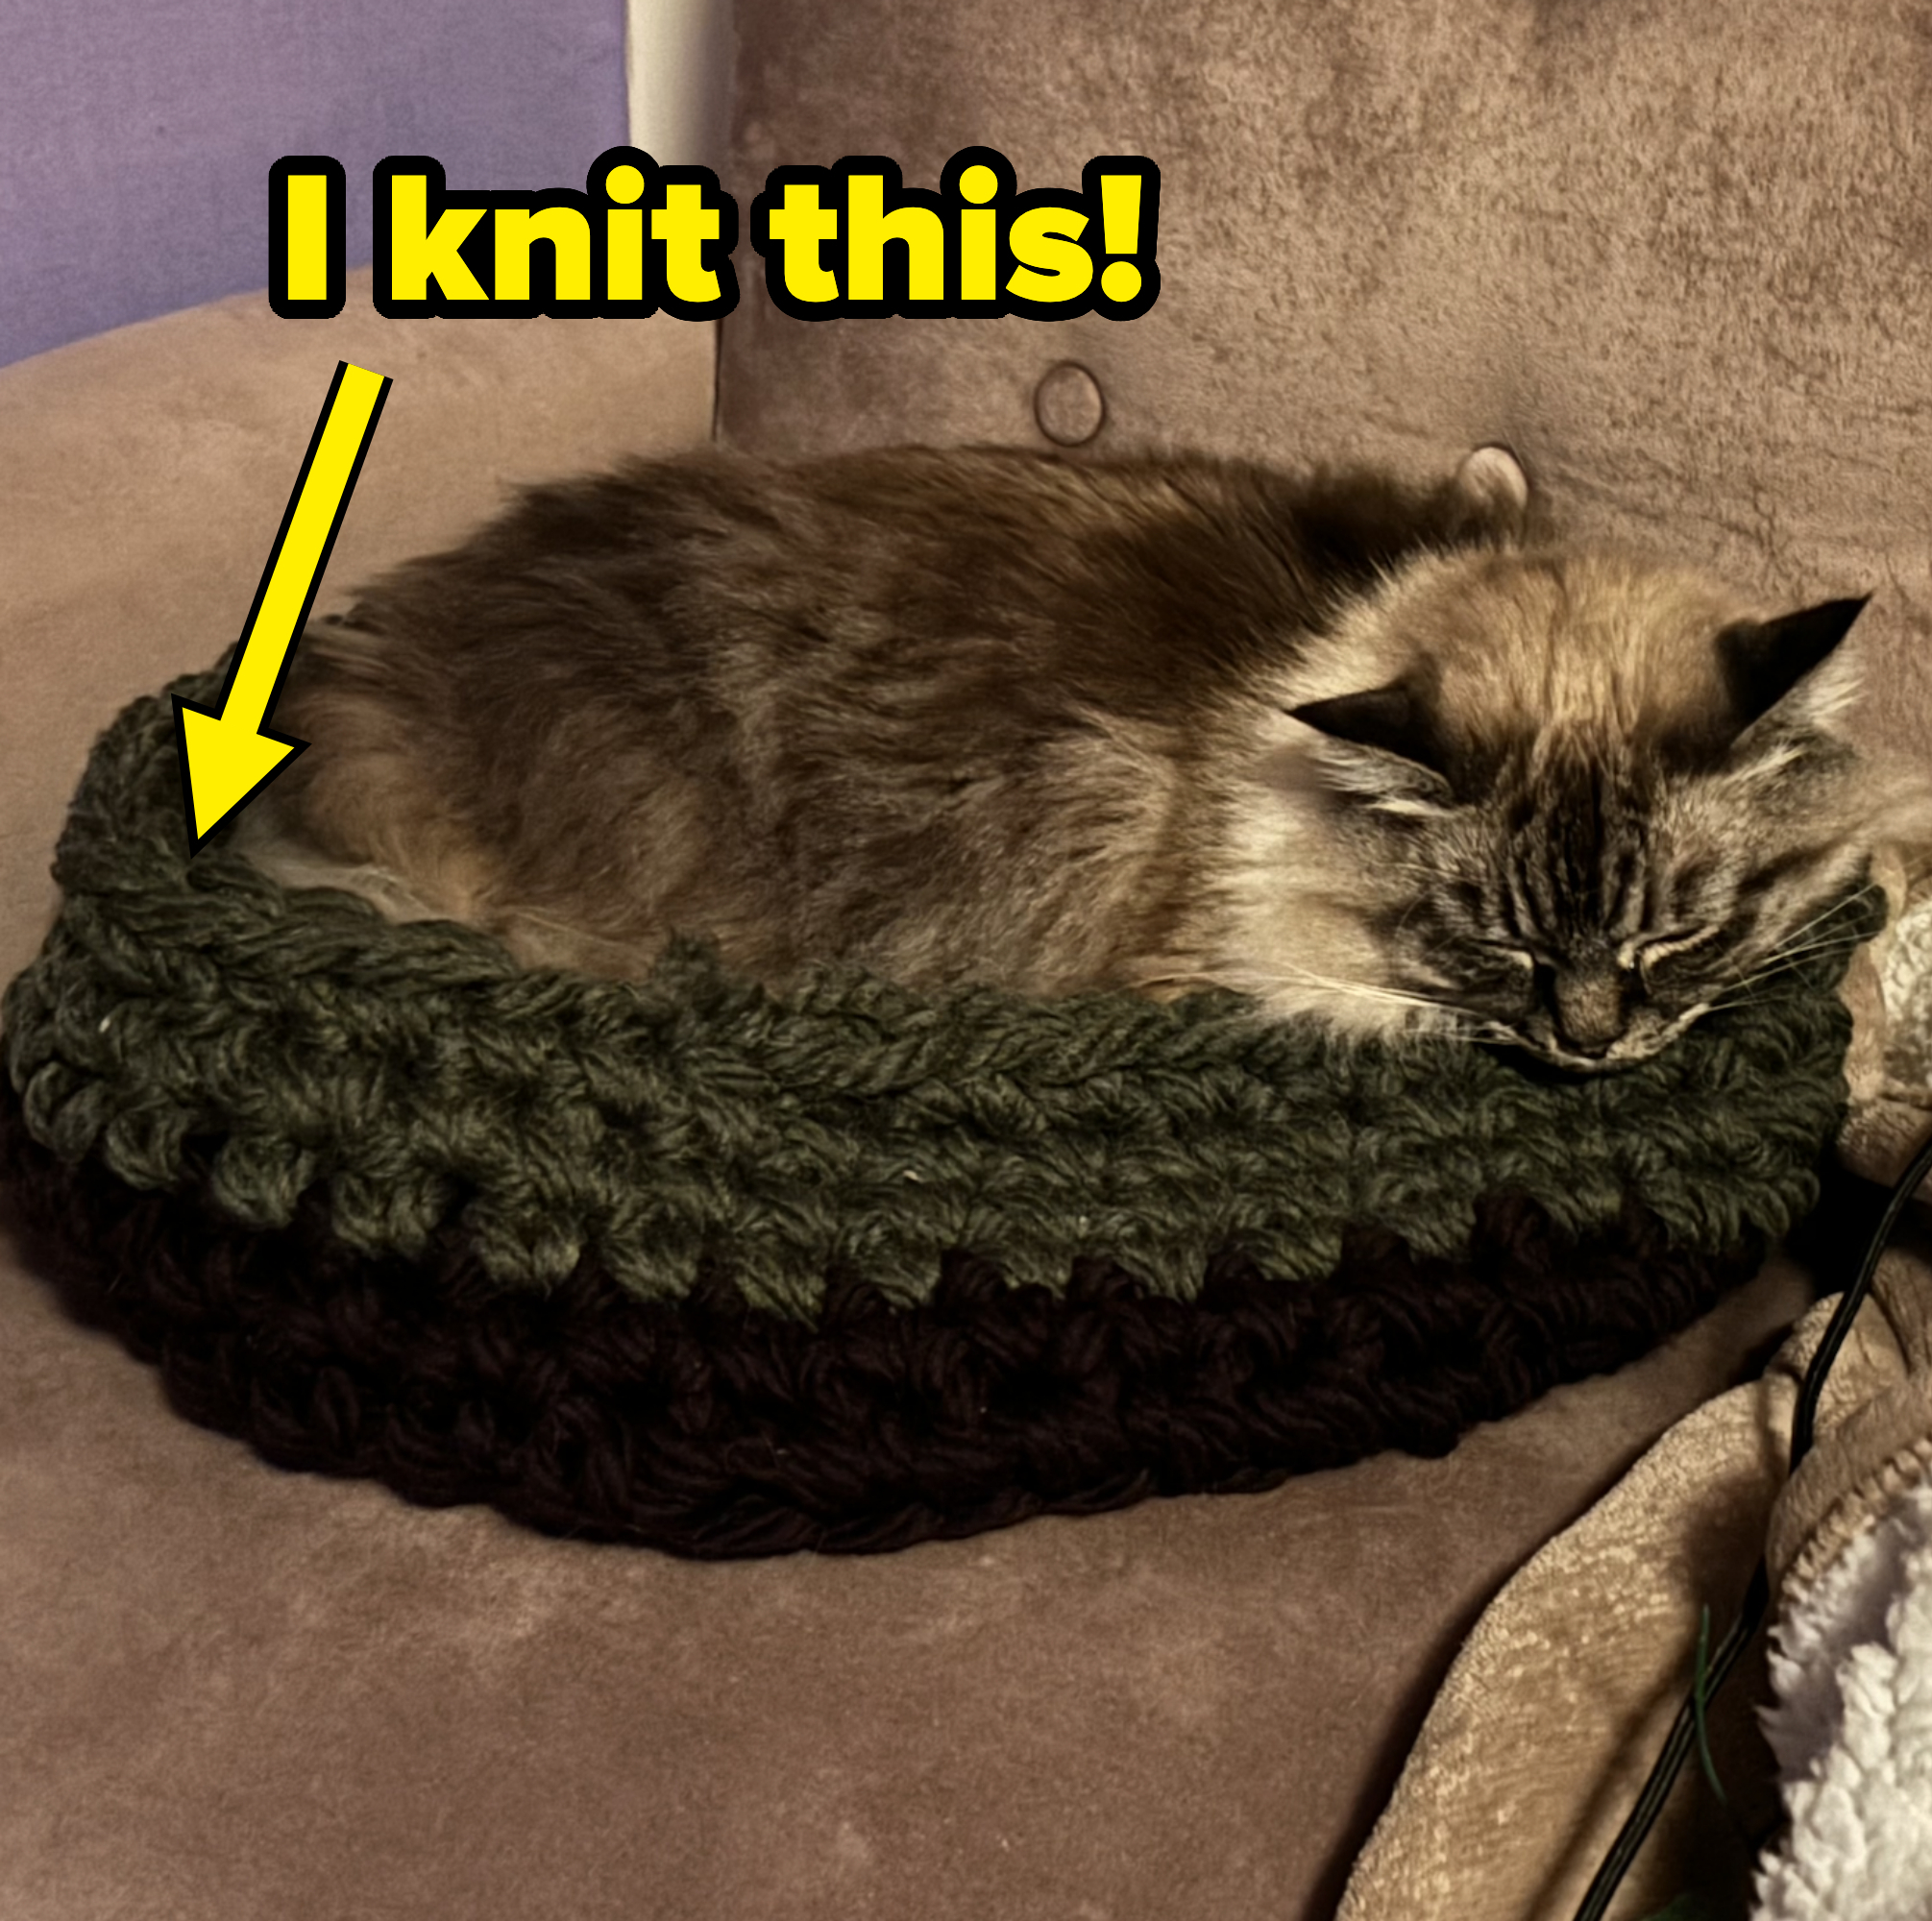 cat in a bed that was knitted by the author